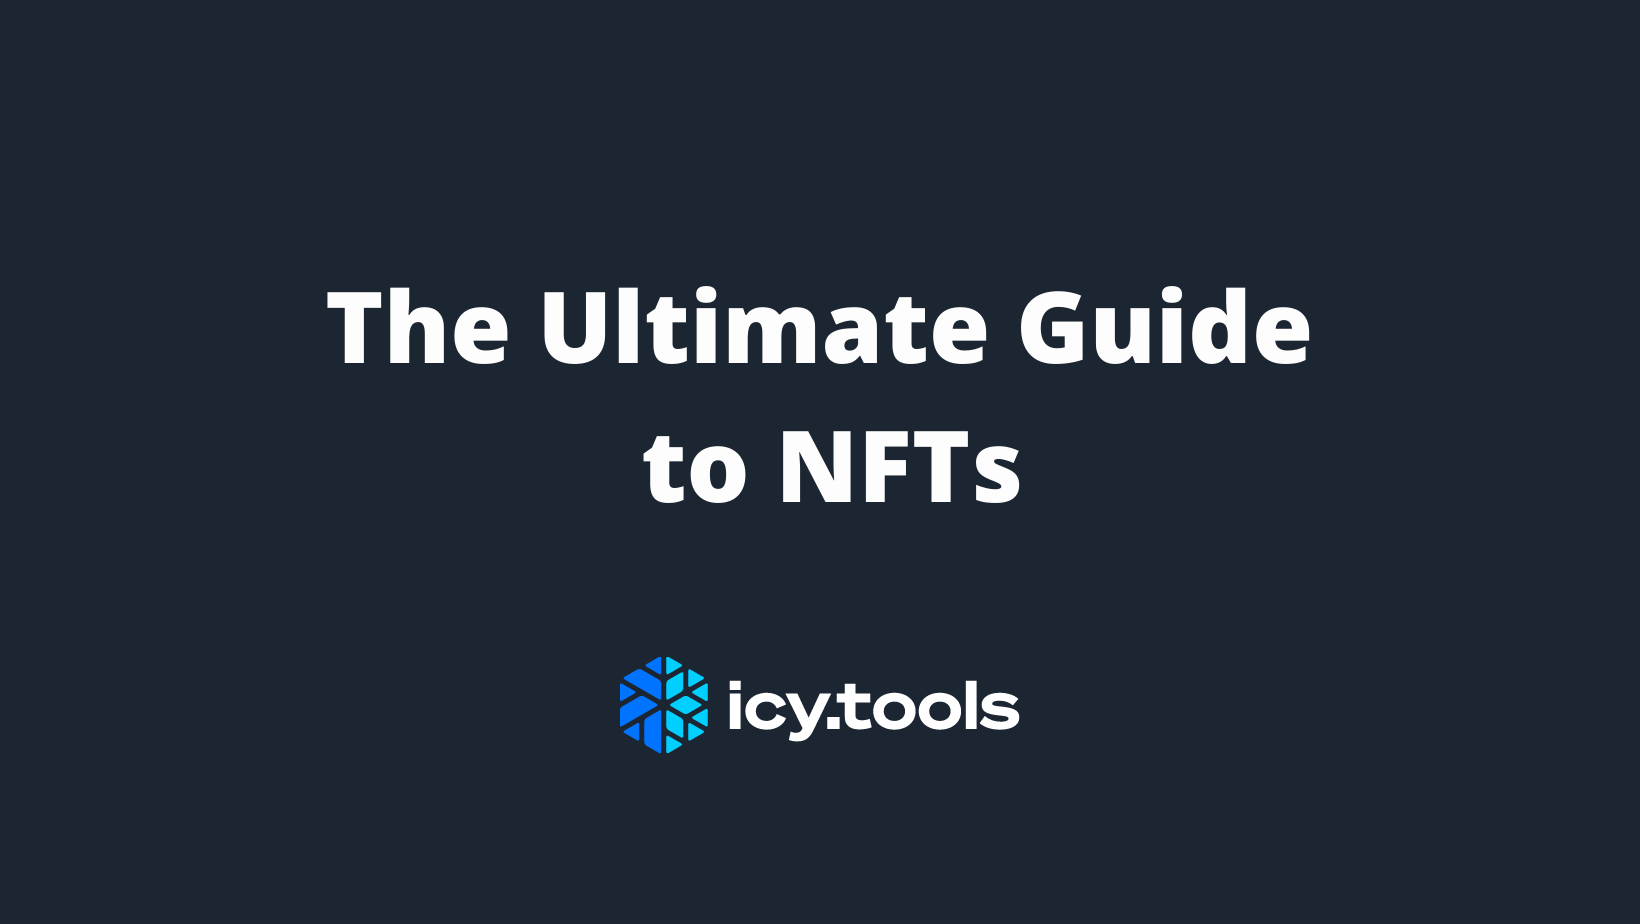 The Ultimate Guide to NFTs